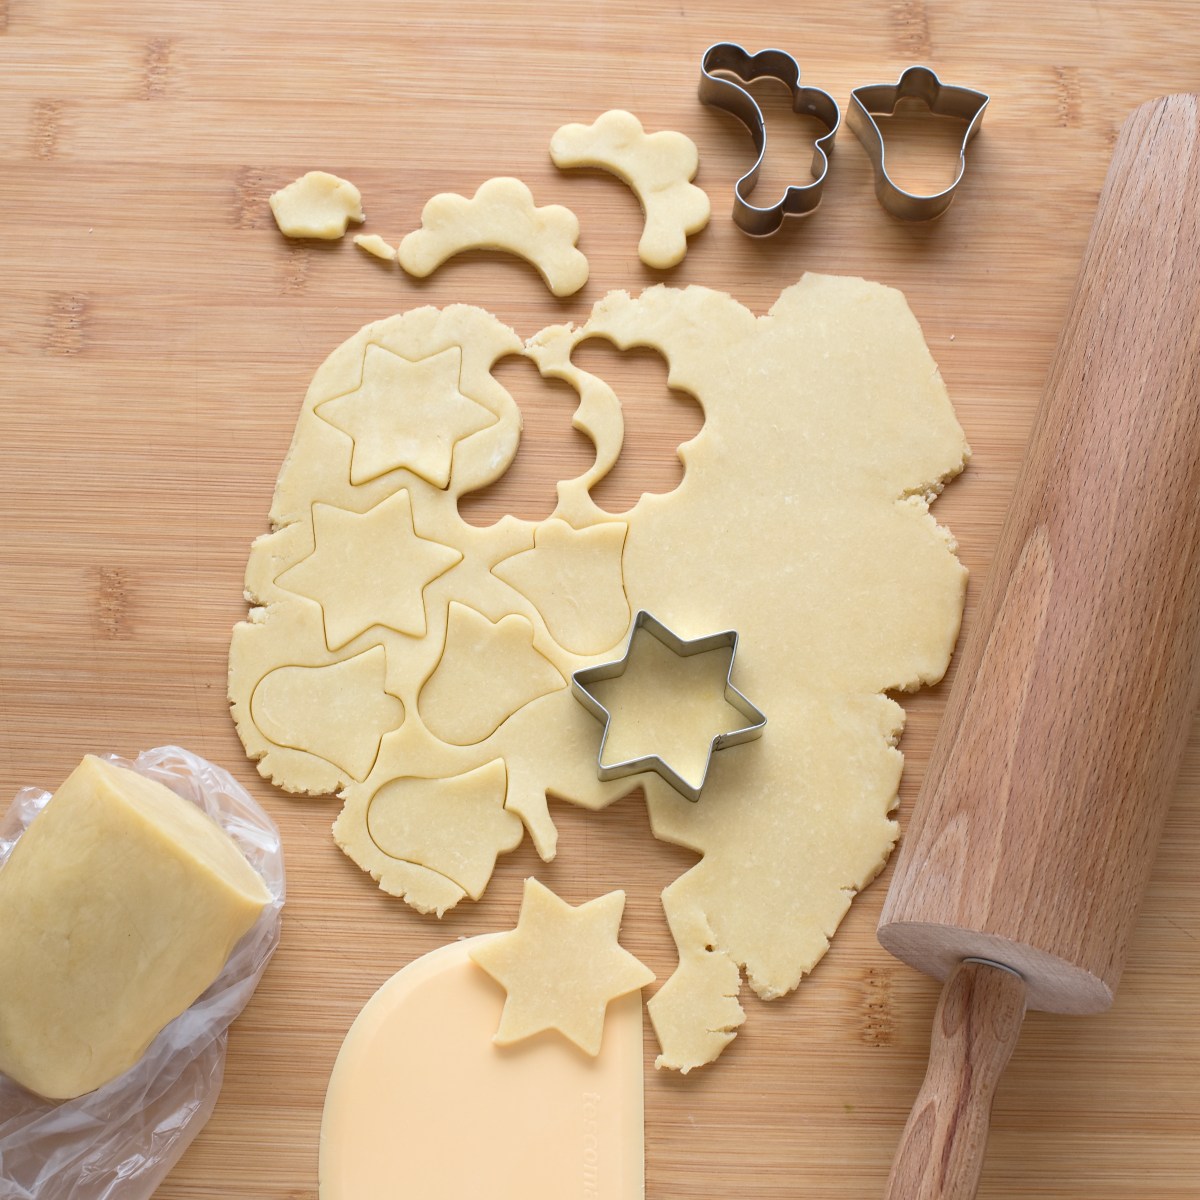 Cutting out different shapes of heavy cream cookies.